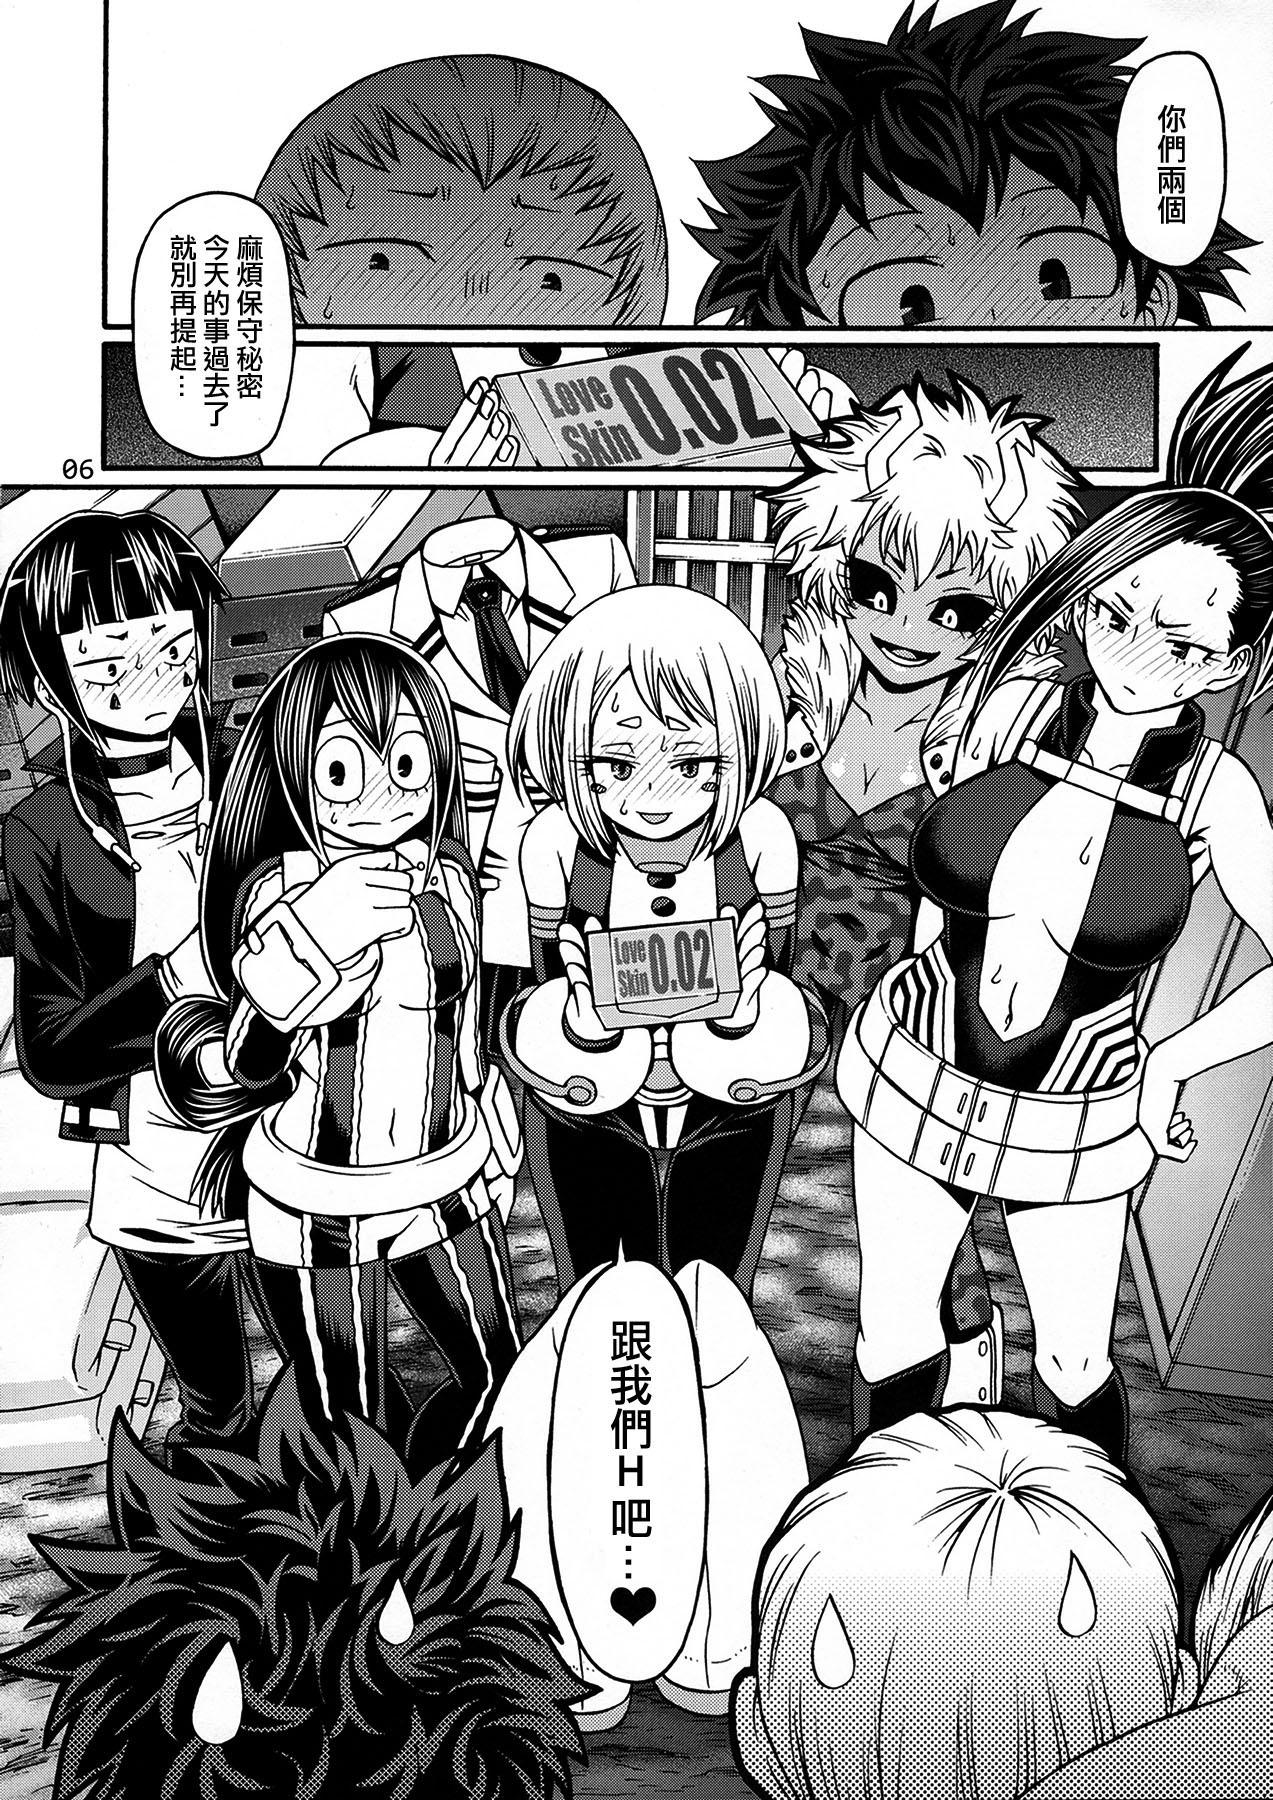 Webcams POPPIN' GIRLS - My hero academia Best Blowjobs Ever - Page 5